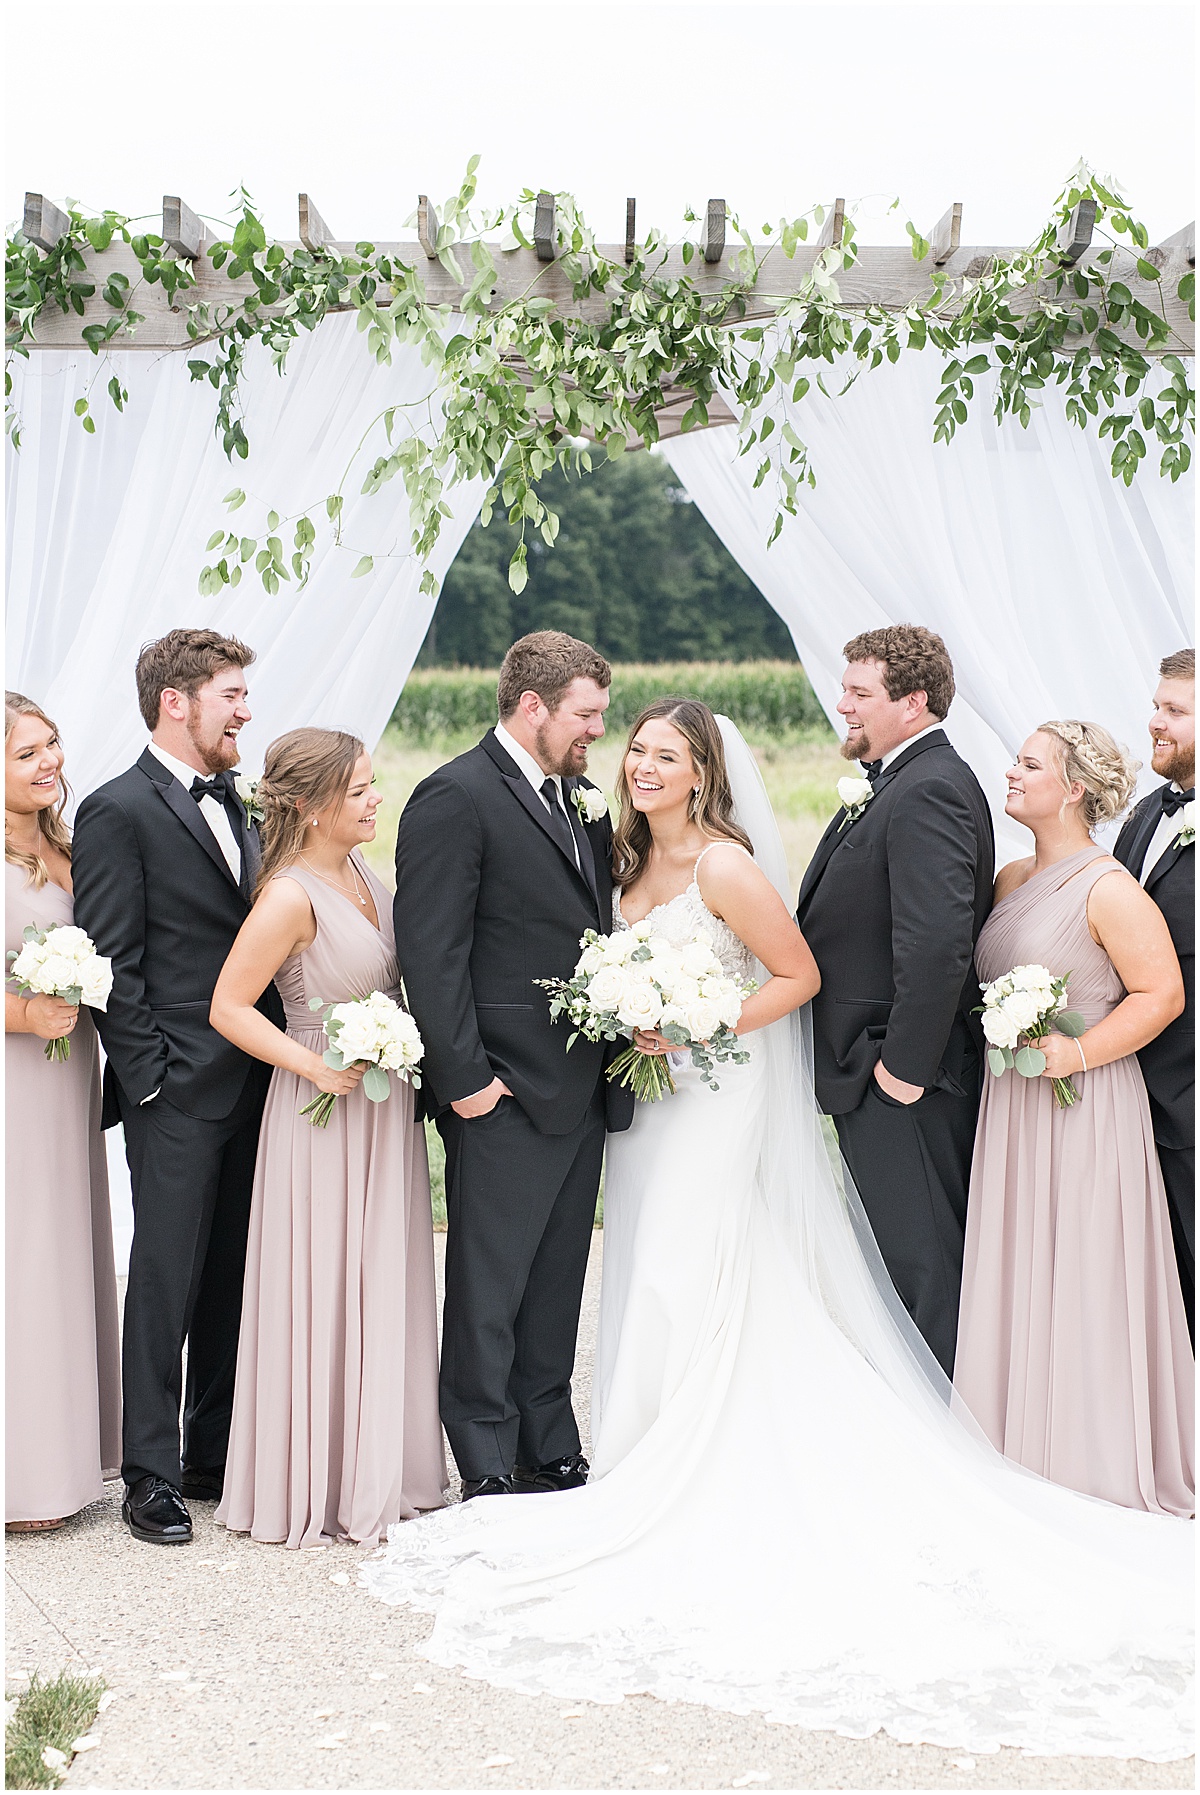 Mr. & Mrs. Smith: A Wedding at The Edge in Anderson, Indiana